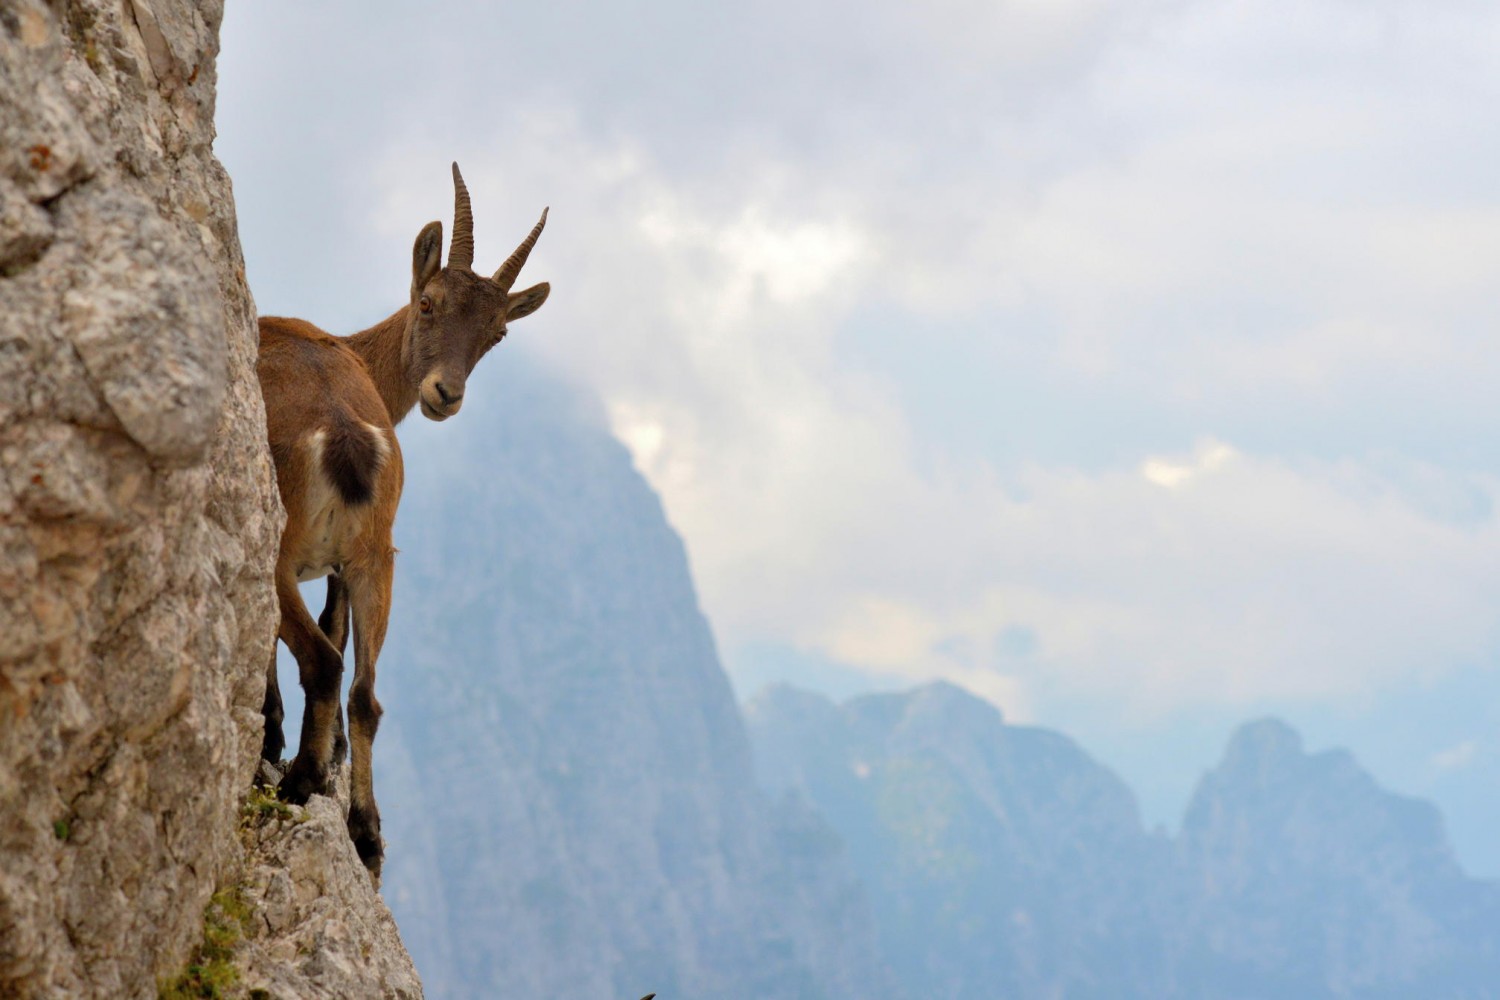 This Heart-Stopping Photo Captures An Ibex On The Edge Of A Mountain